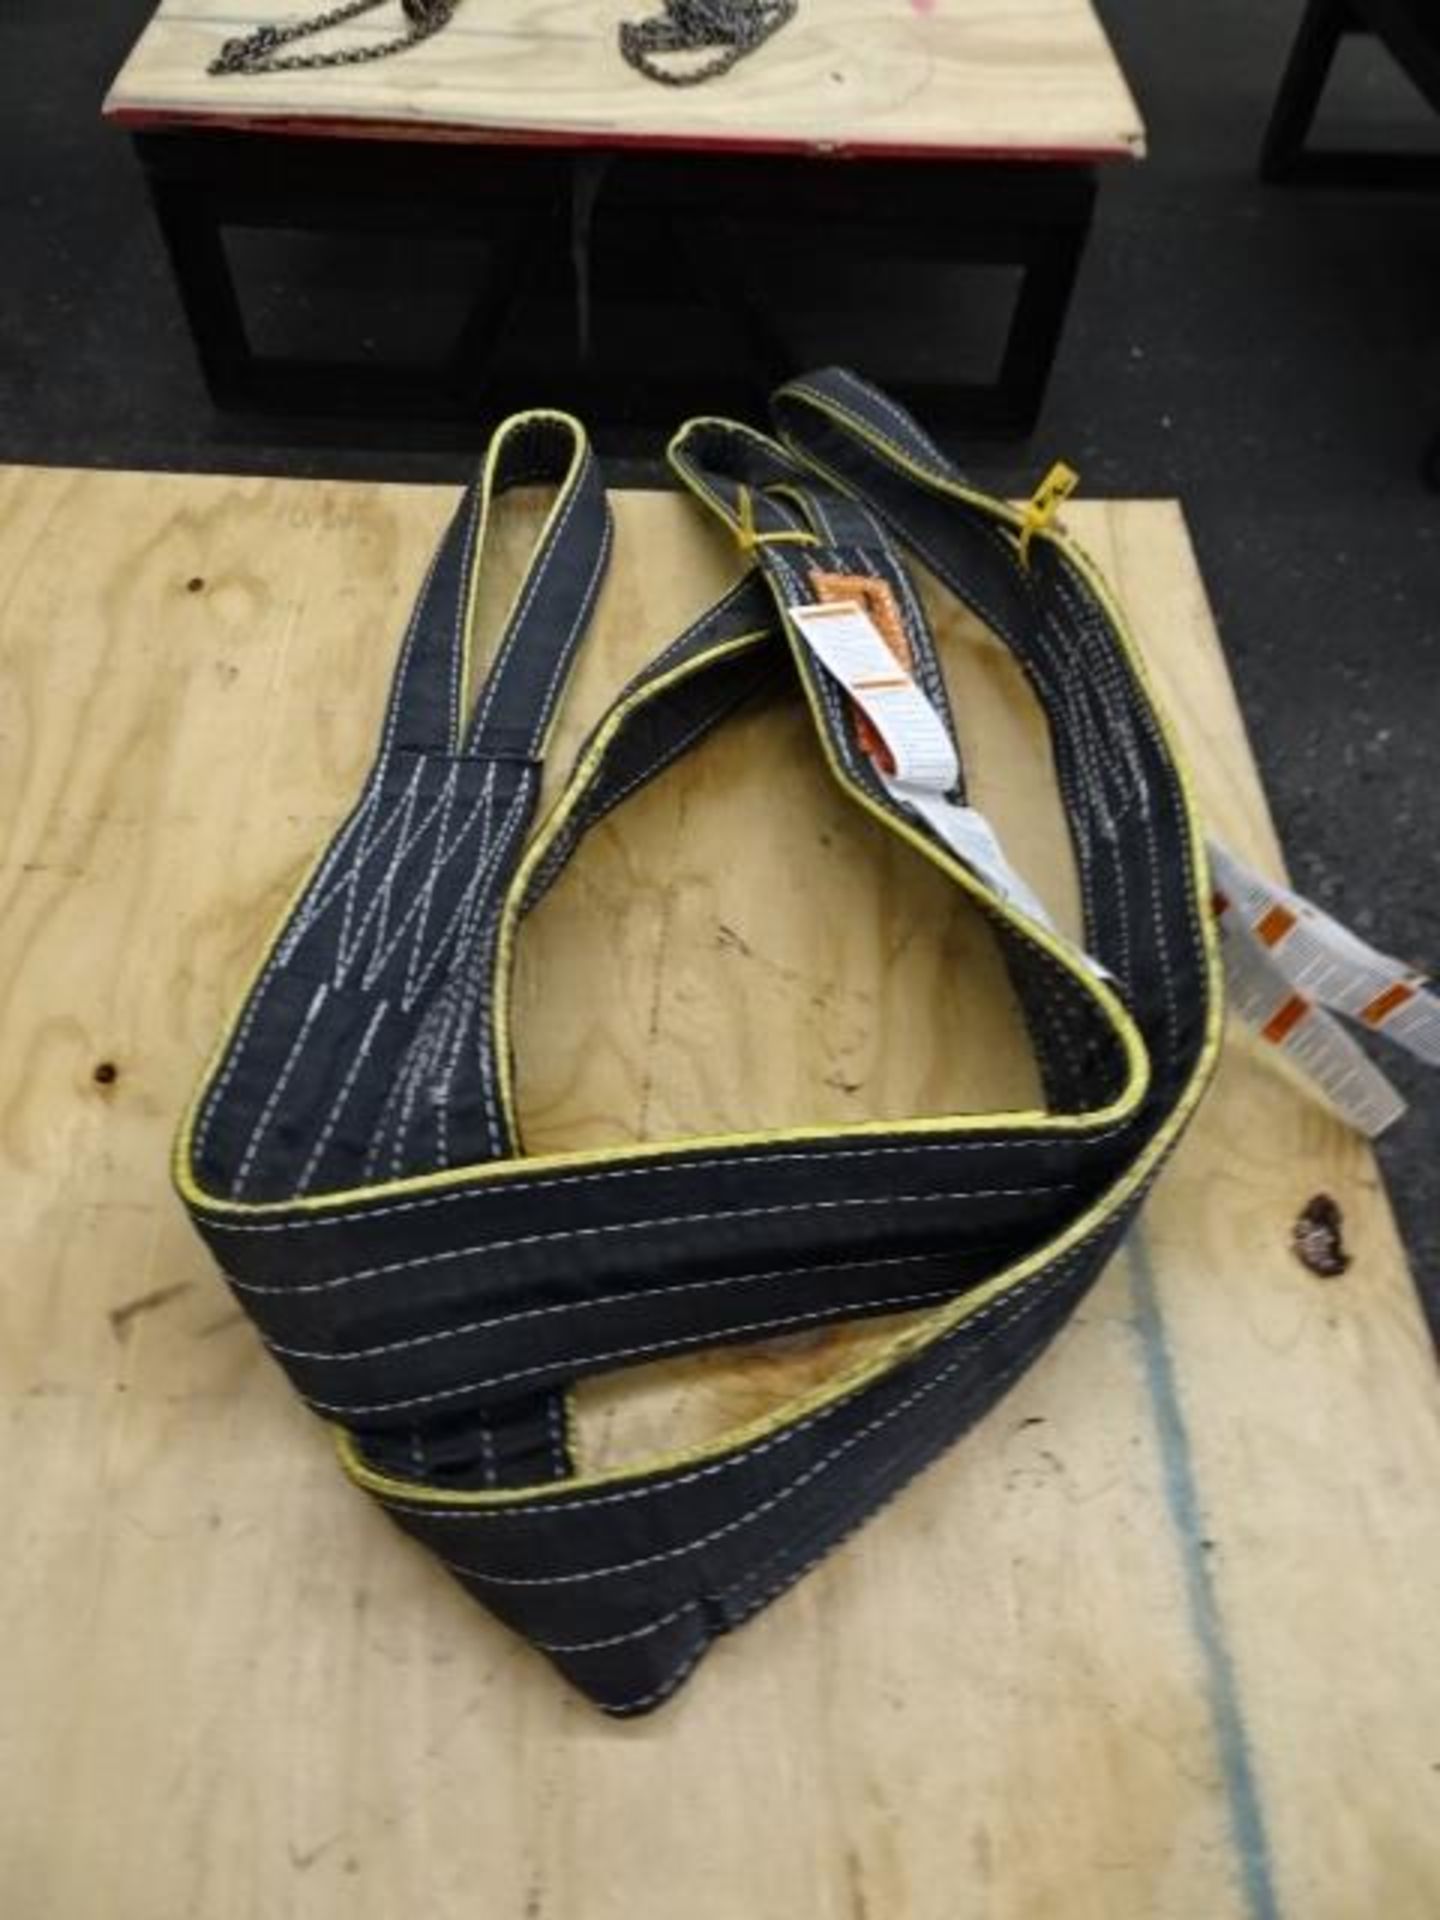 Assorted Lifting Slings